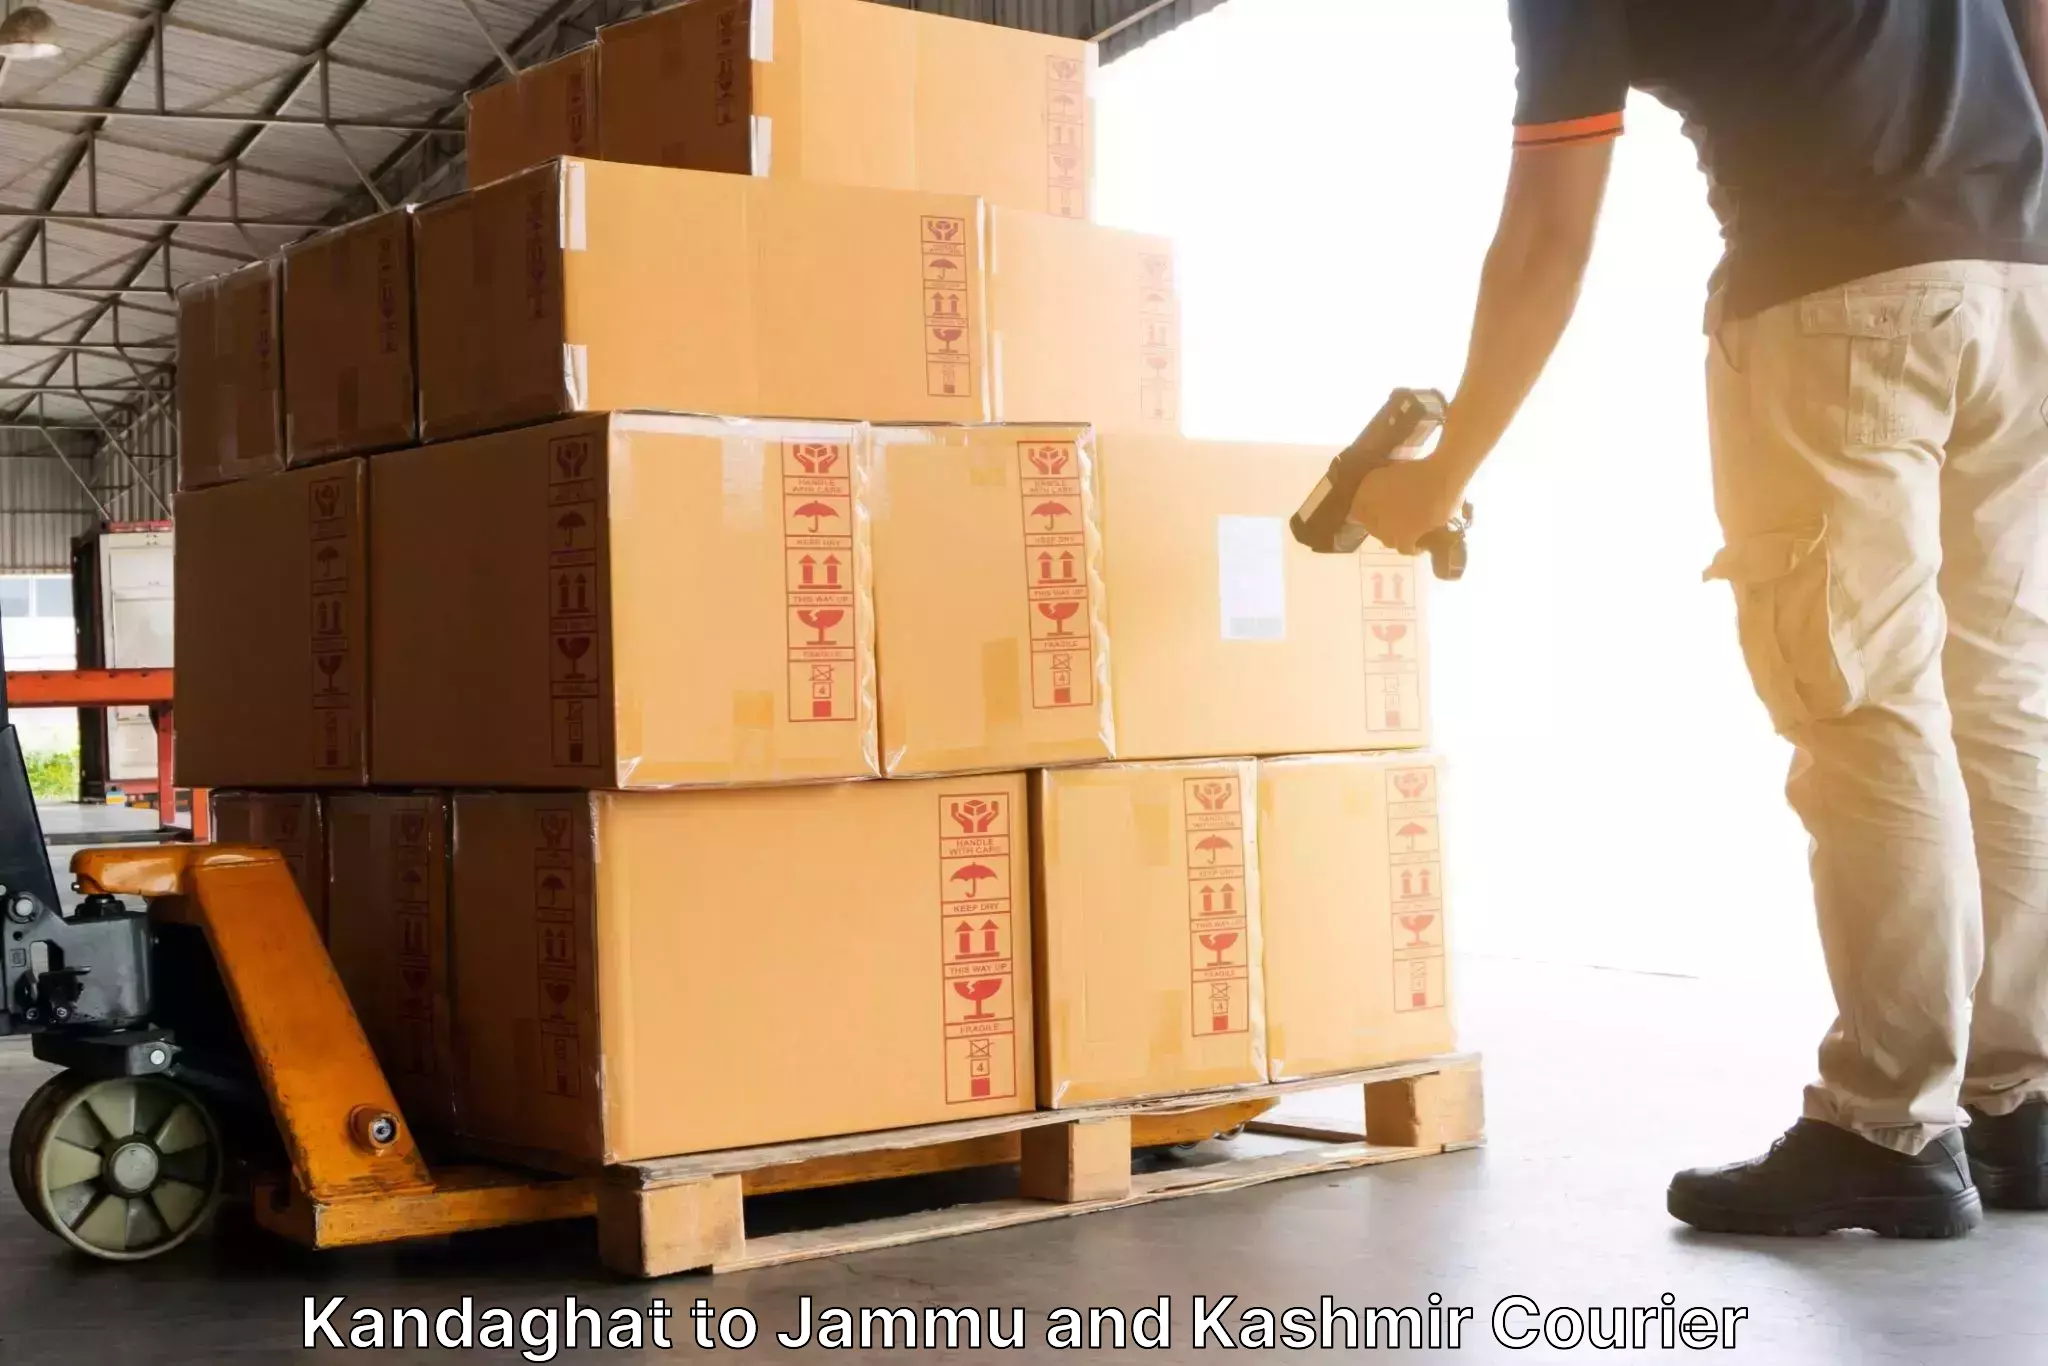 Seamless shipping experience Kandaghat to Jammu and Kashmir